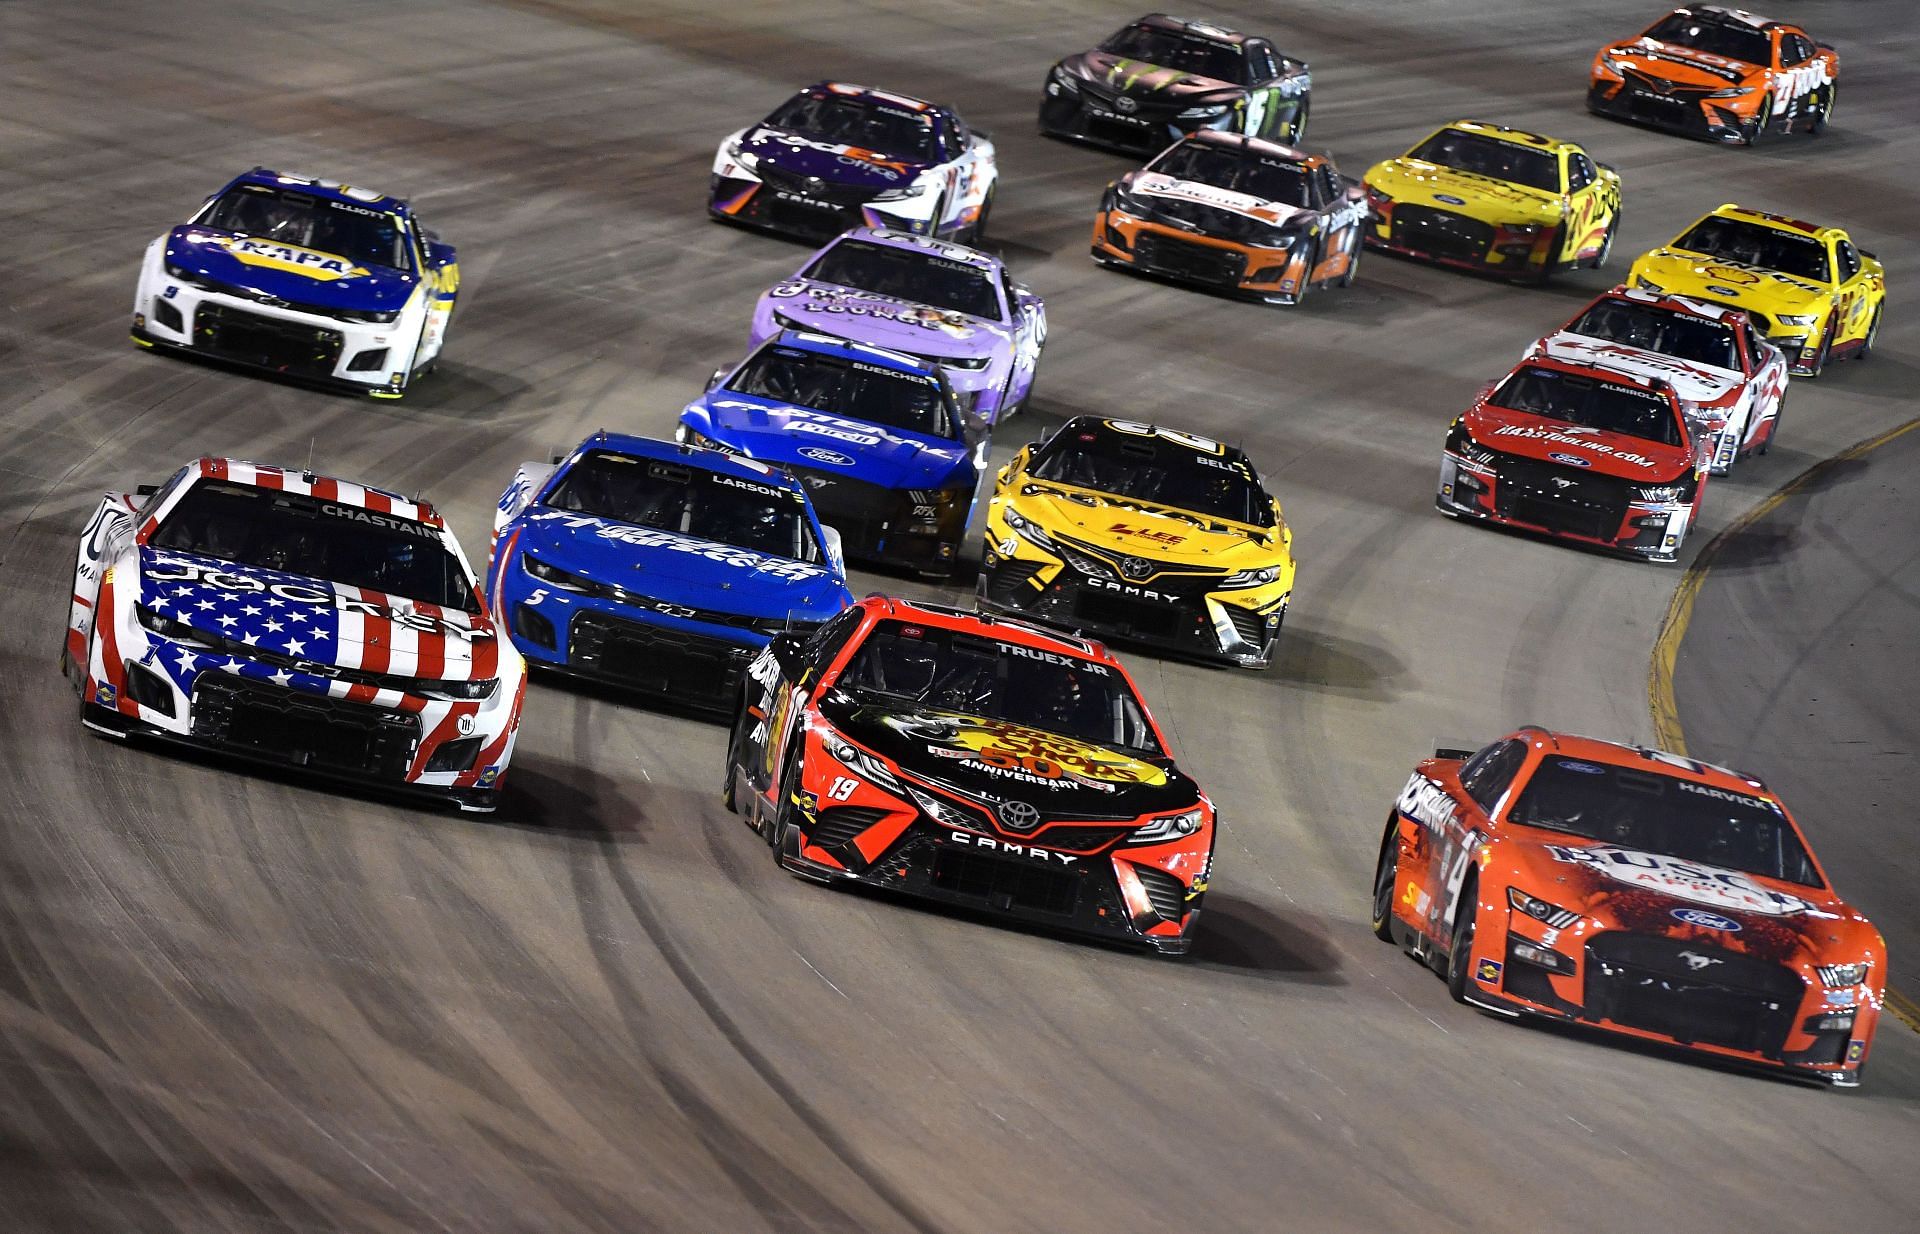 NASCAR Ally 400 start time, TV schedule, where to watch, and more explored